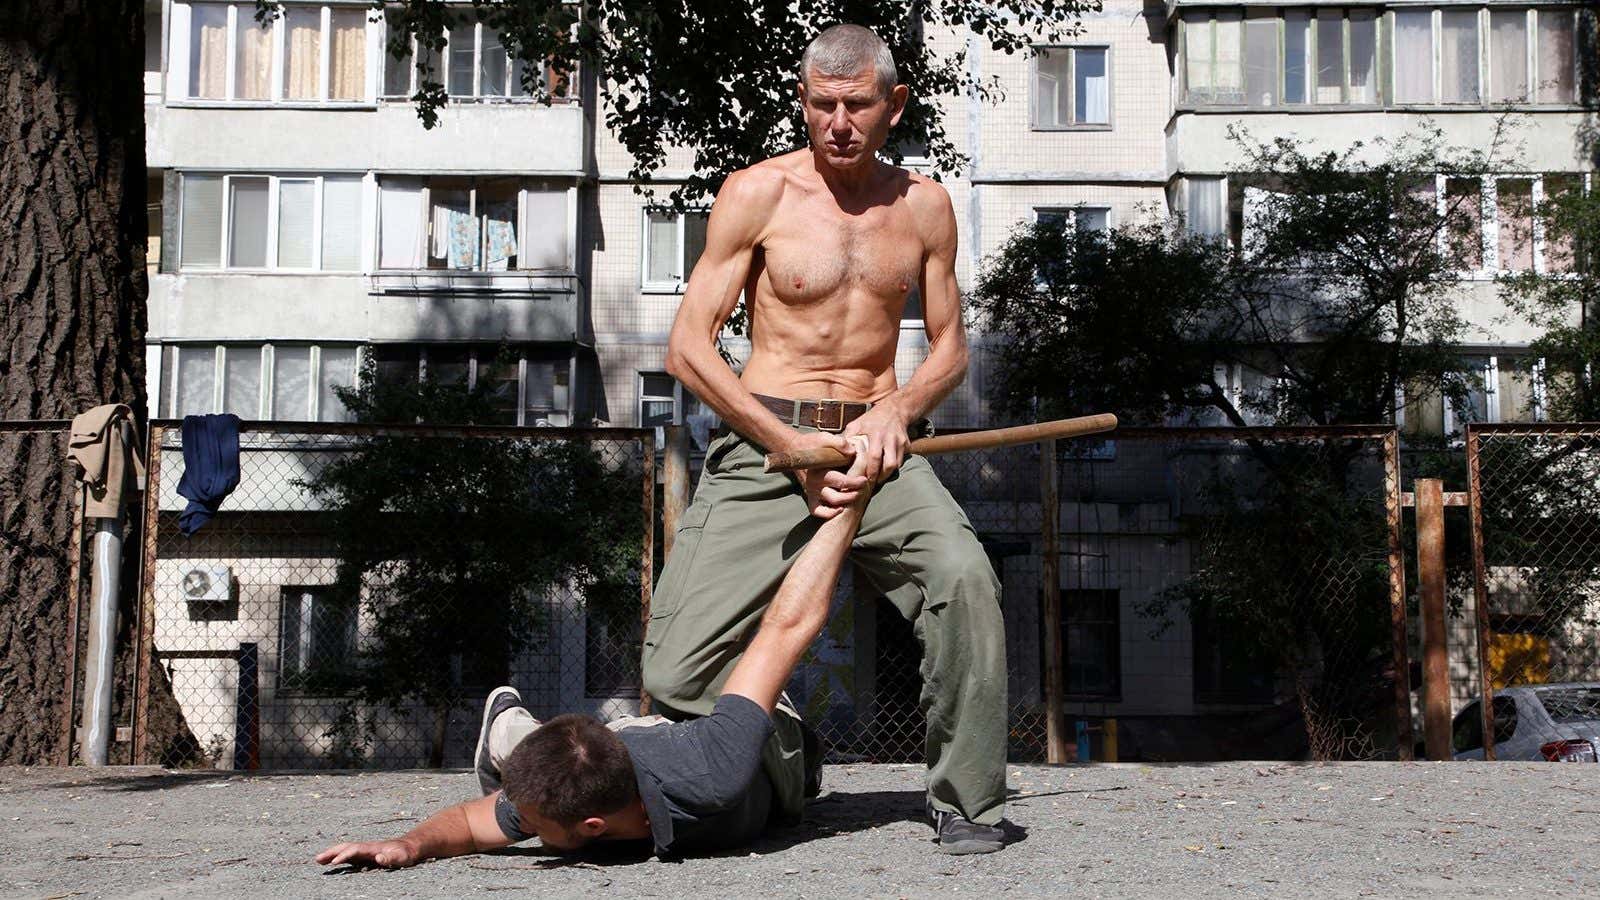 Systema is a Soviet-era martial art used by the KGB.